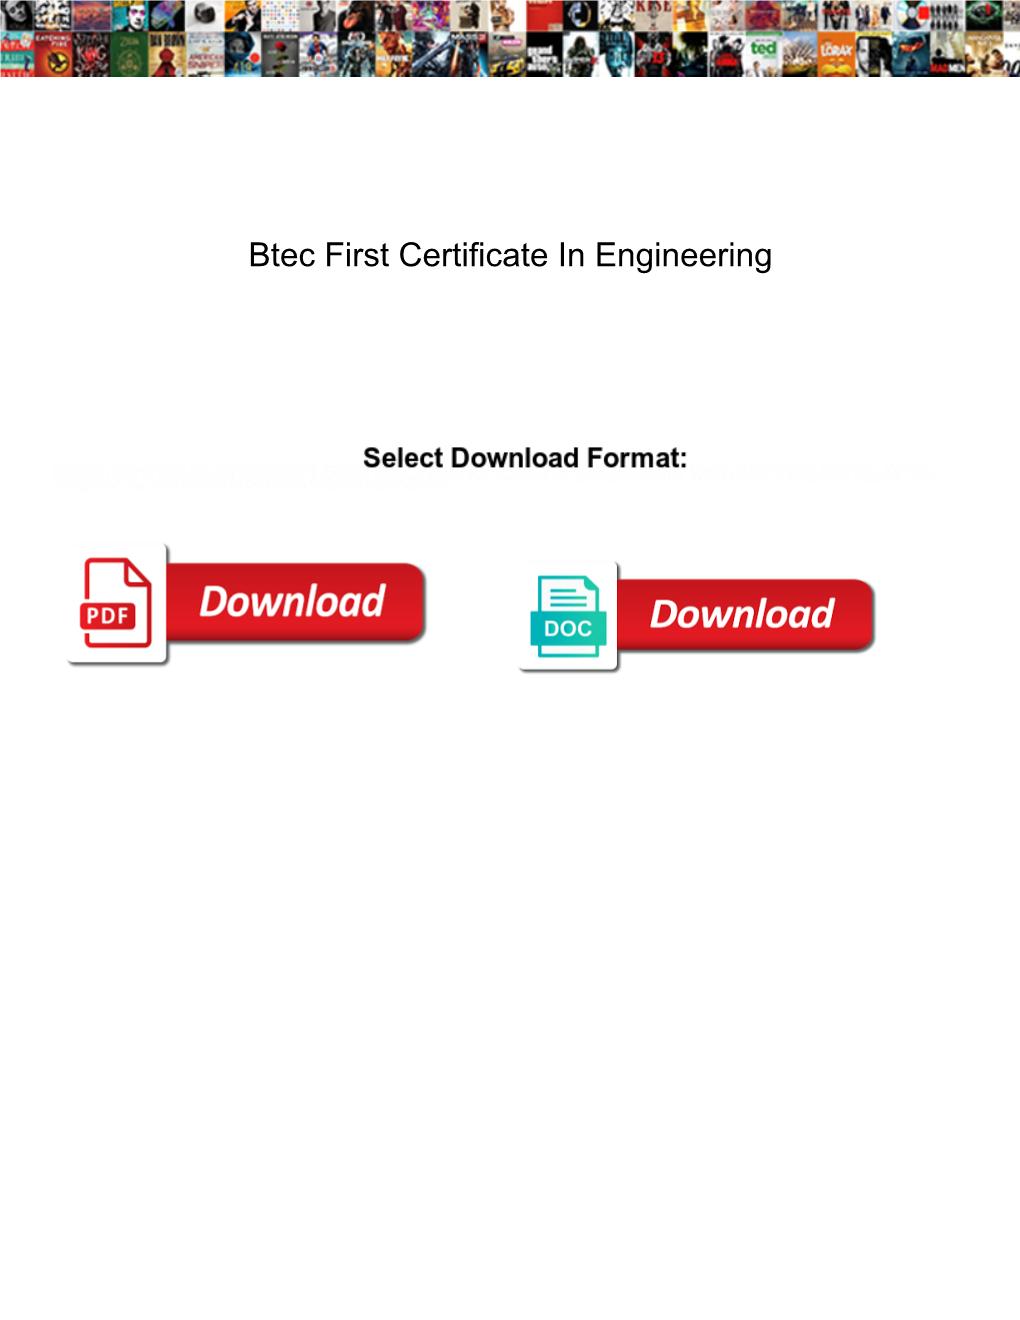 Btec First Certificate in Engineering